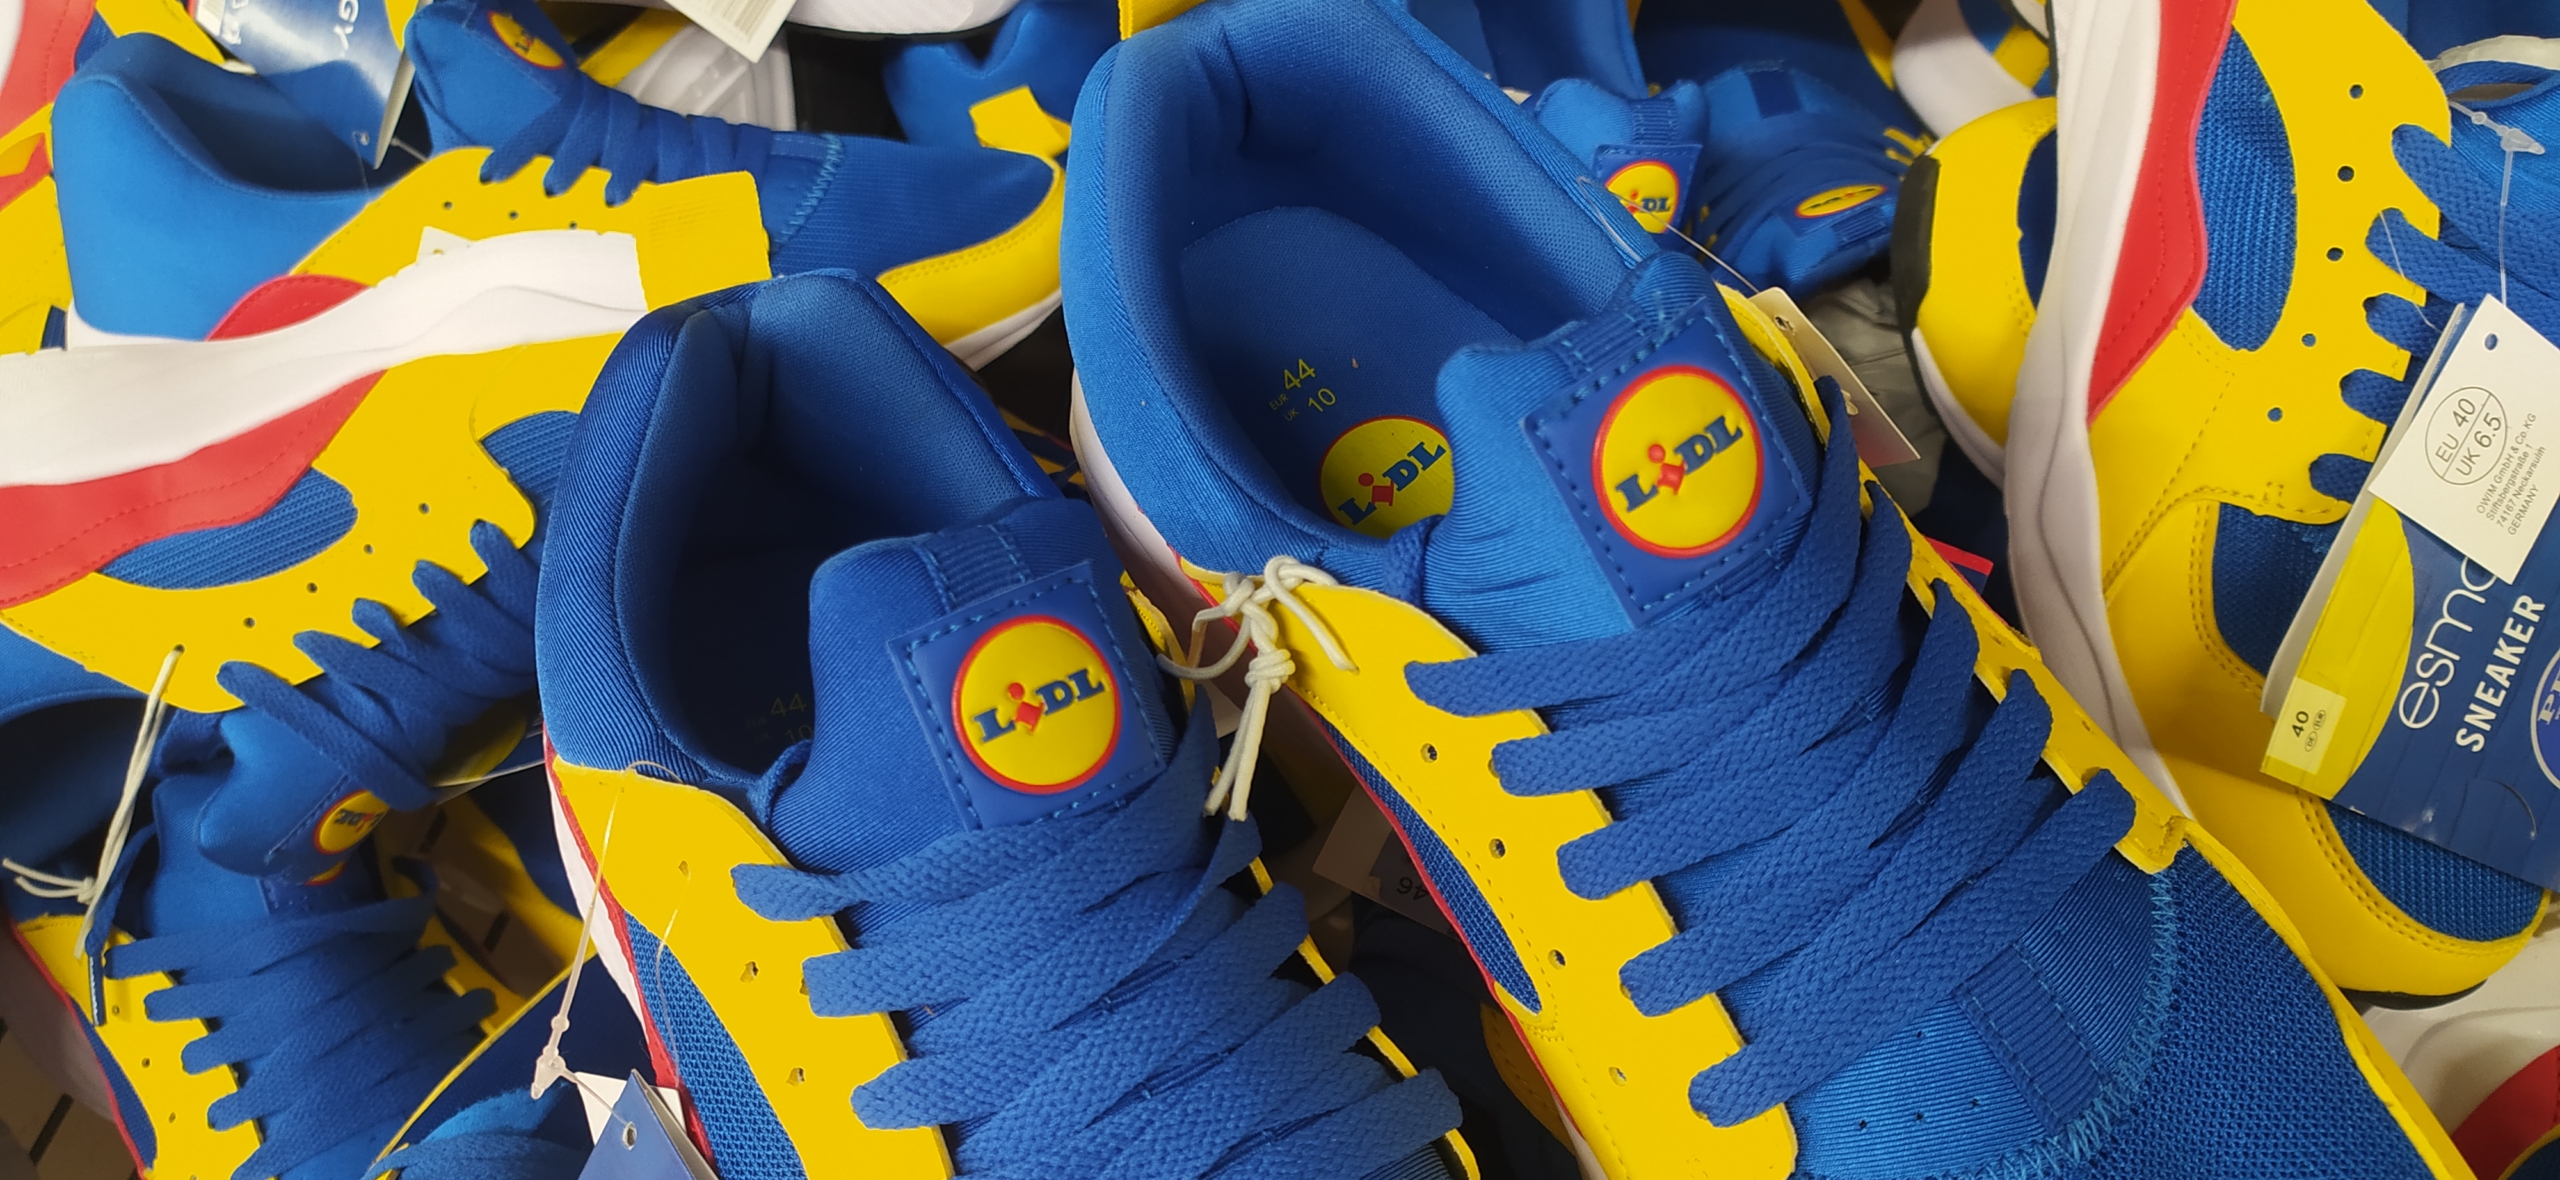 Lidl Shoes Number 40 (6.5) - Limited Edition - New & Perfect - Sneakers